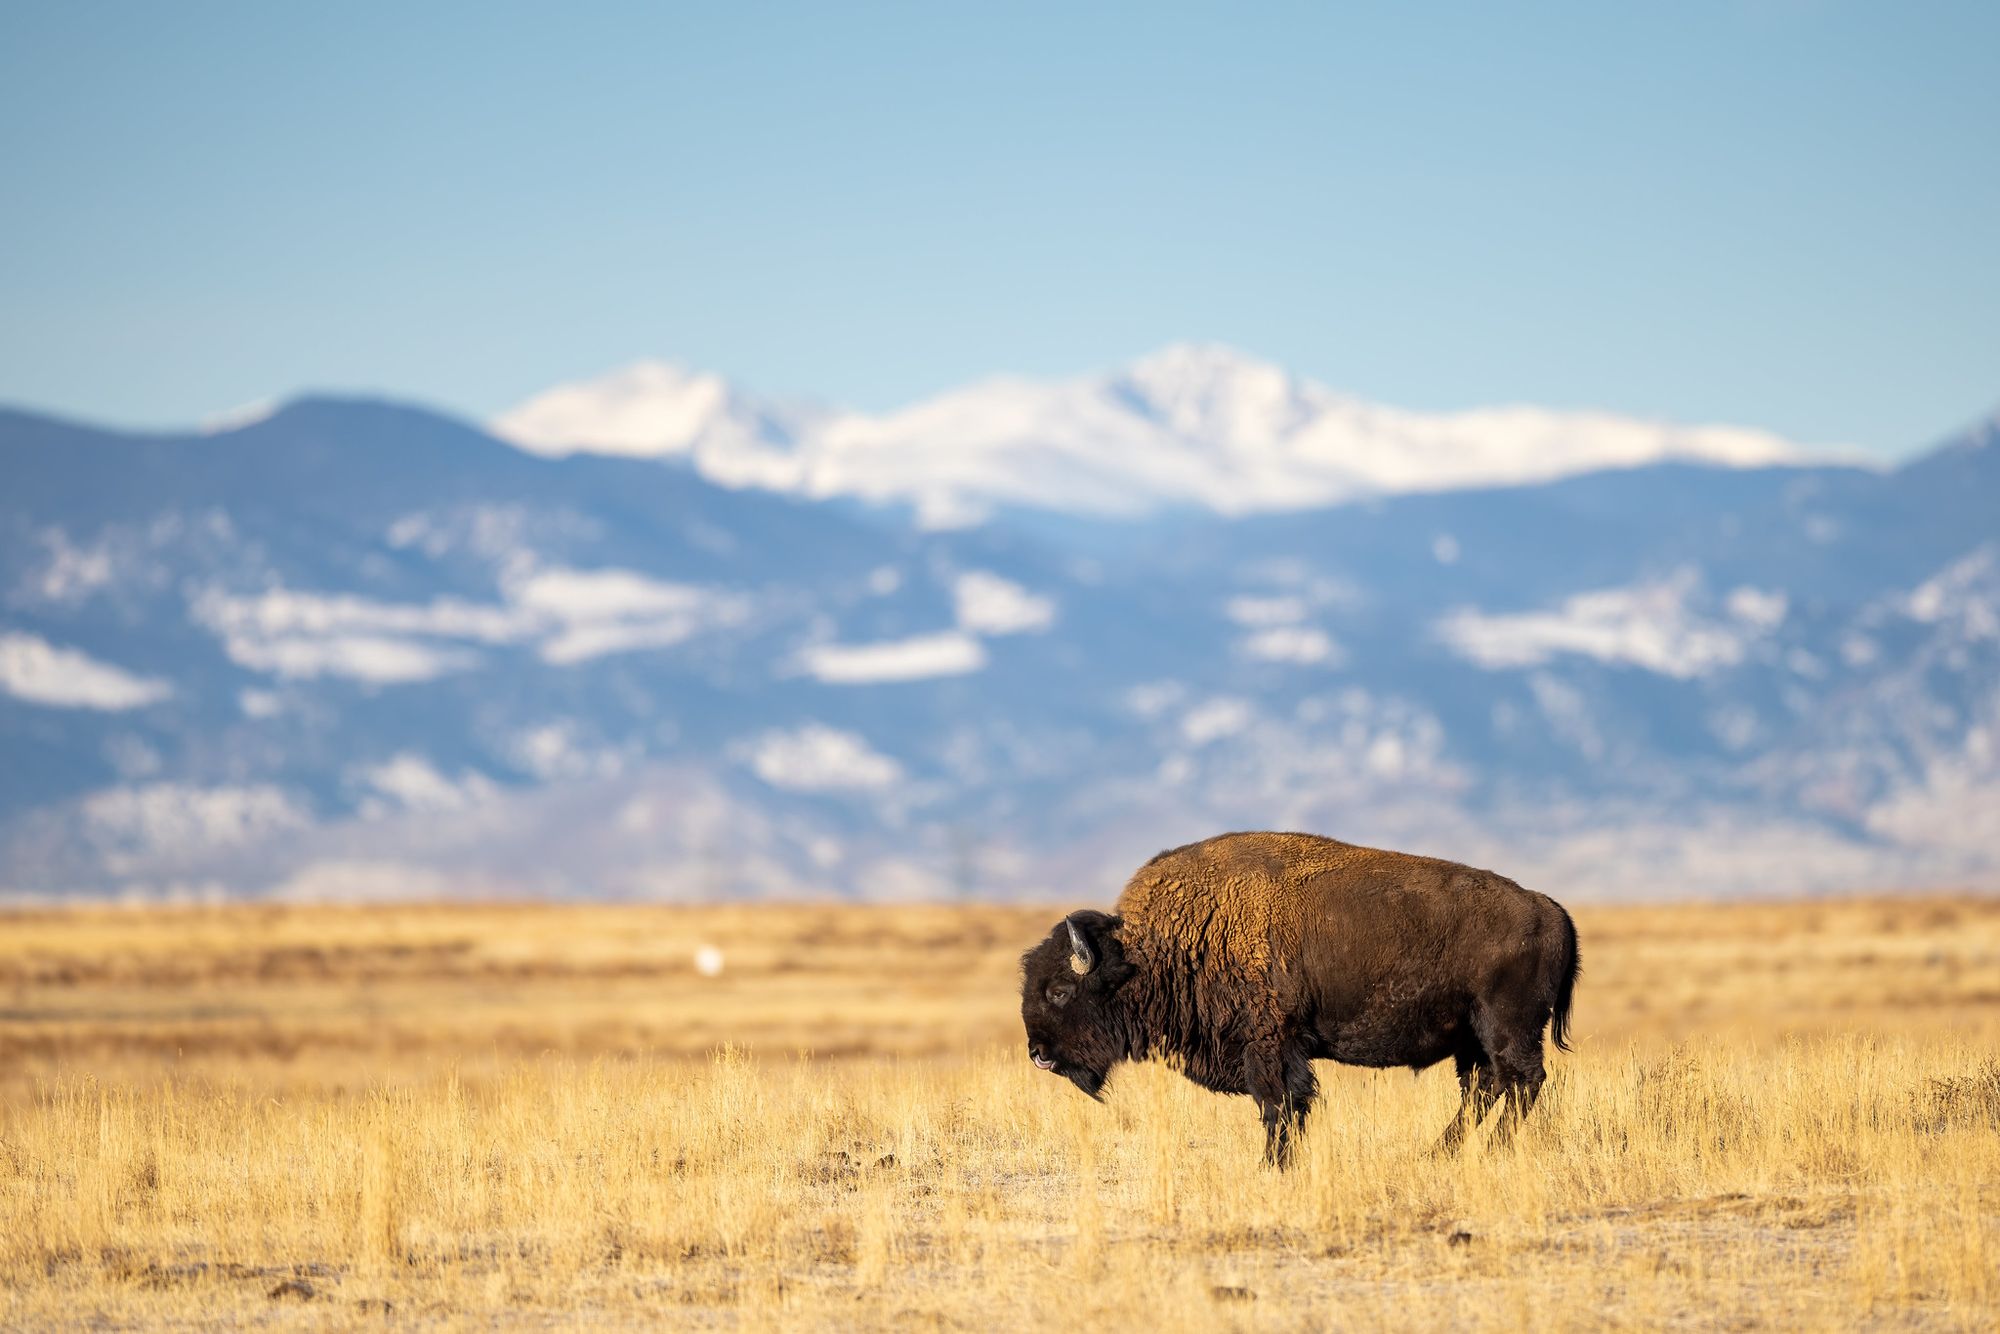 A bison grazing on golden grass with snow-capped mountains in the background